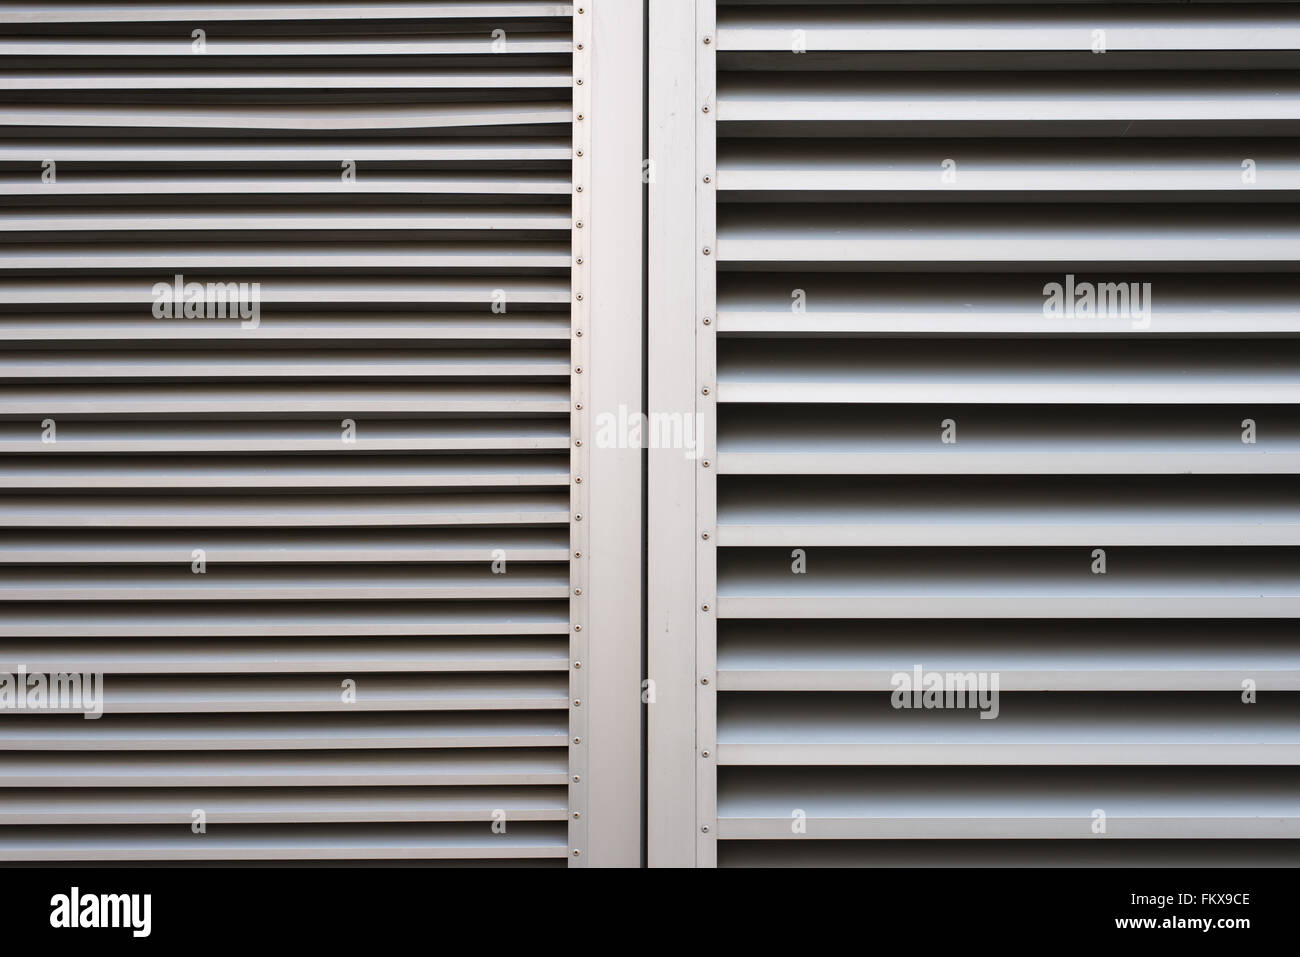 Abstract symbol idea. difference of life, Aluminium grill for ventilation Stock Photo